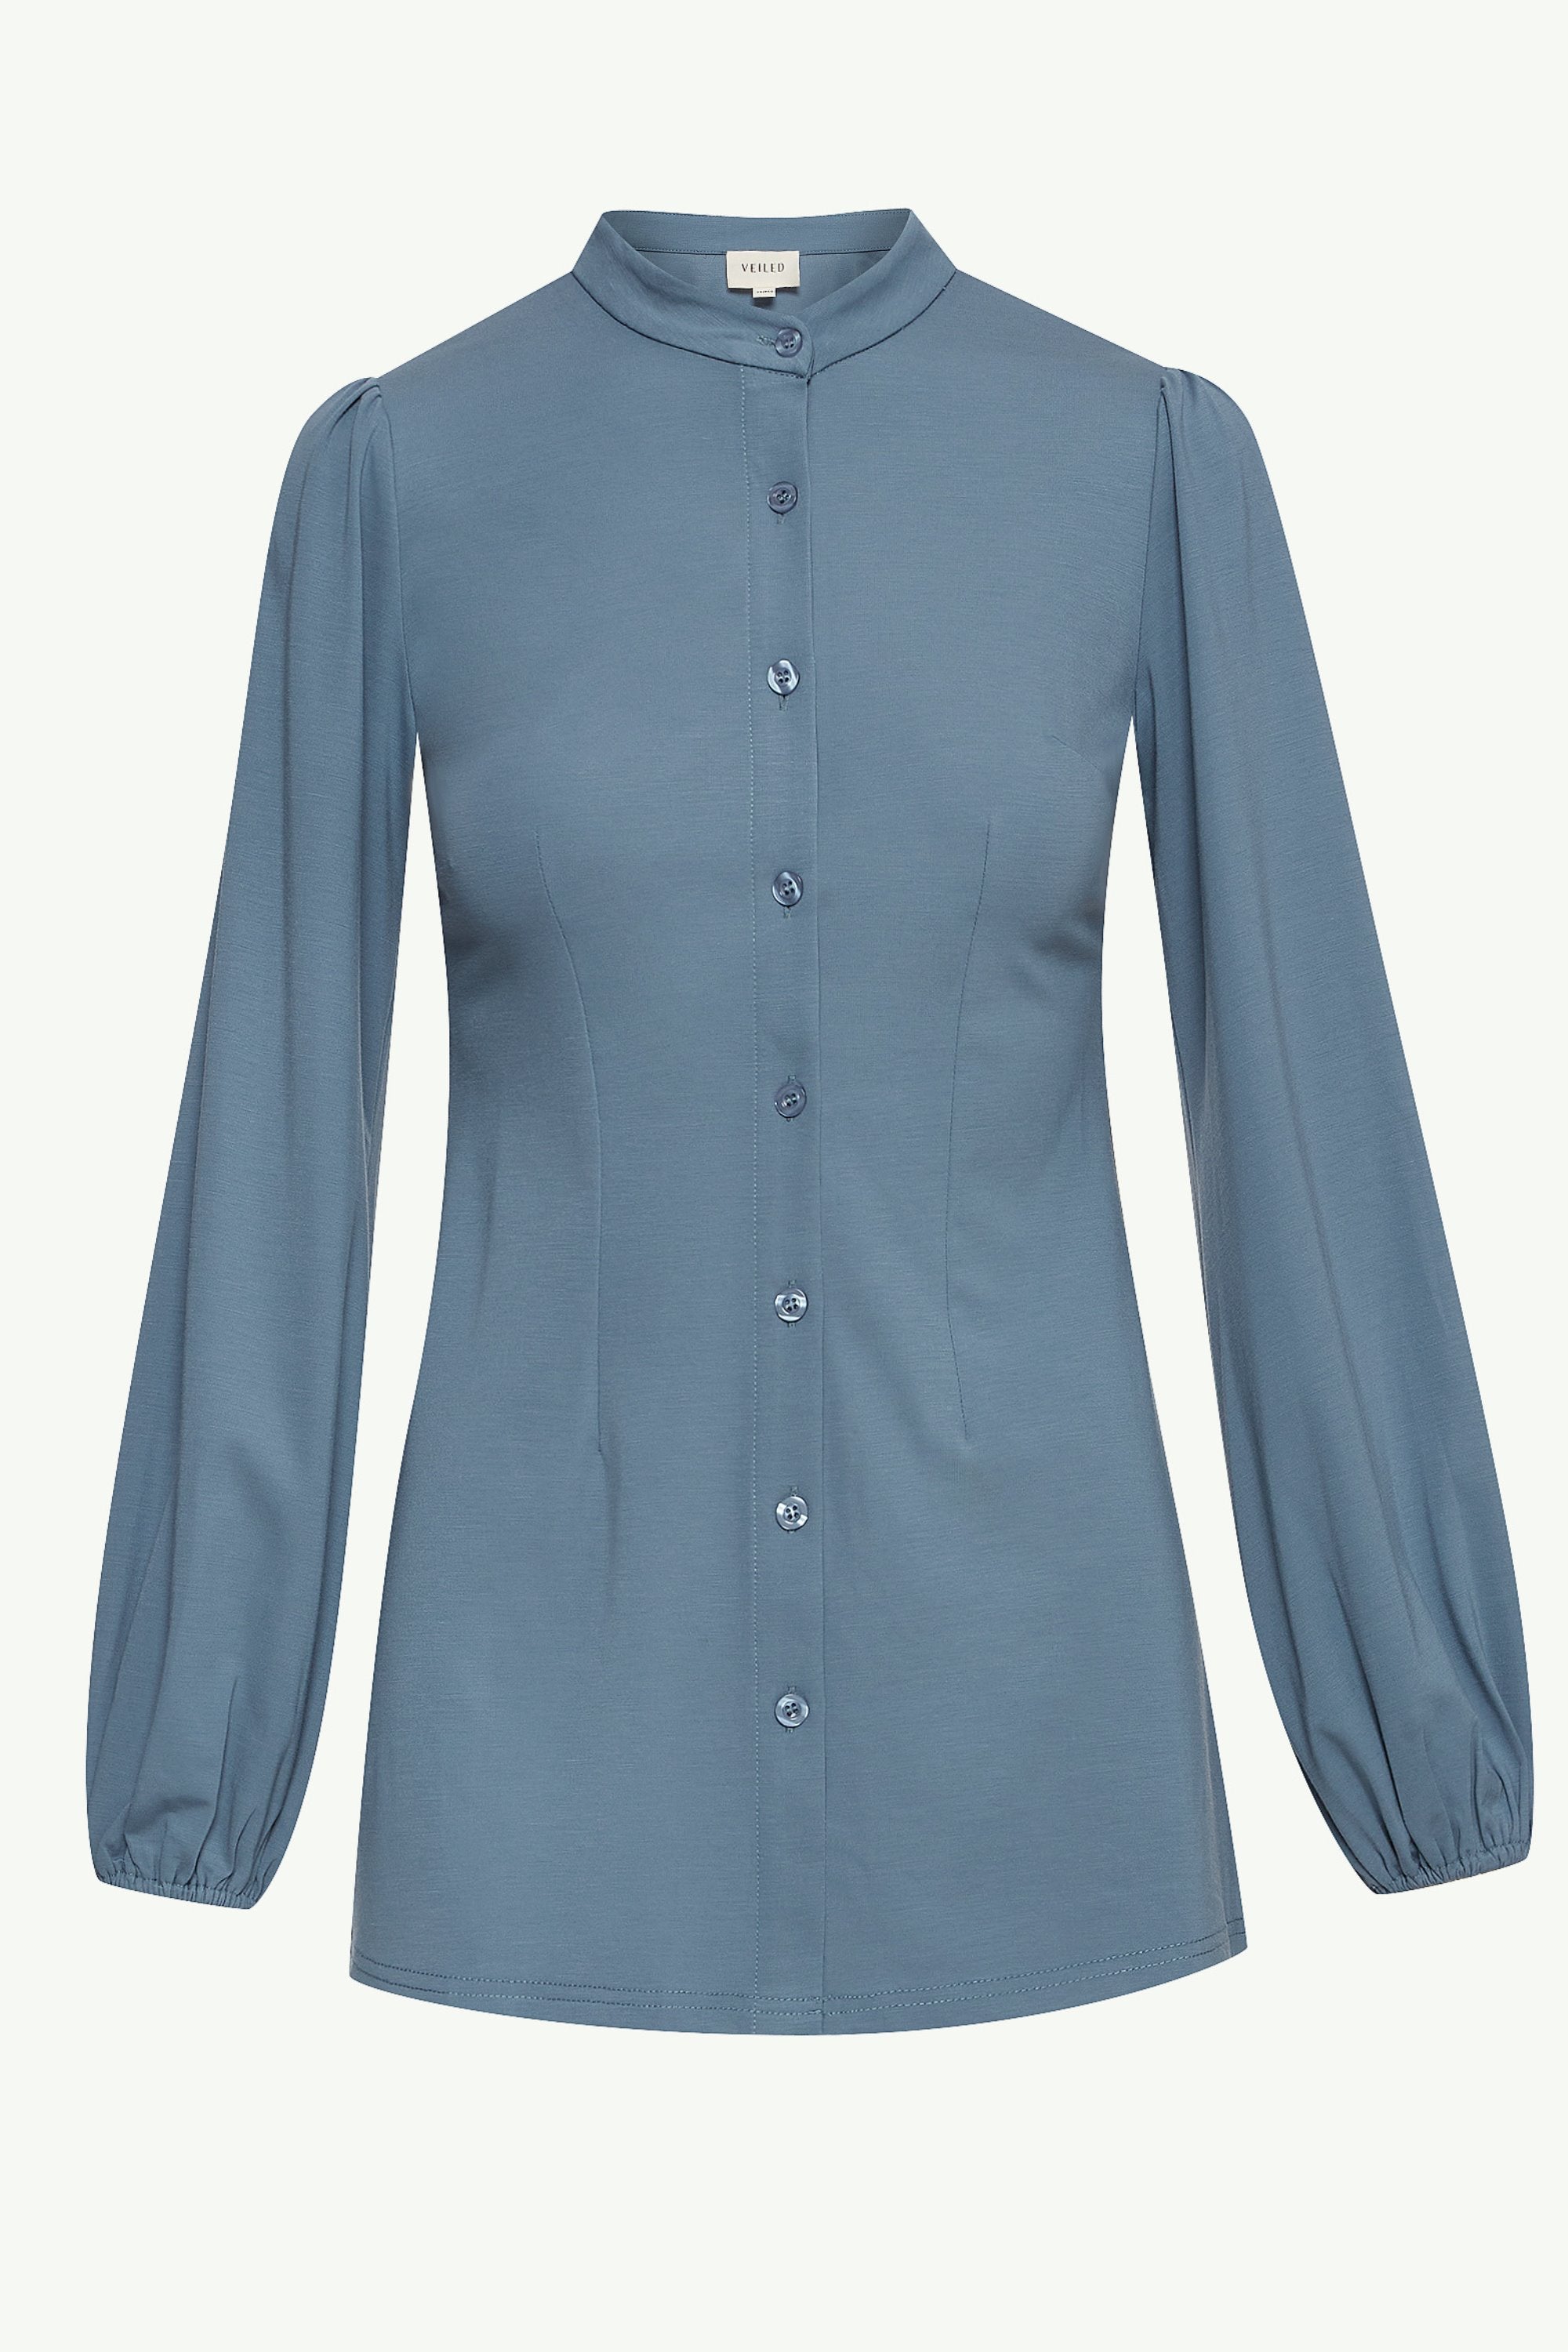 Rayana Jersey Button Down Top - Denim Blue Clothing Veiled 